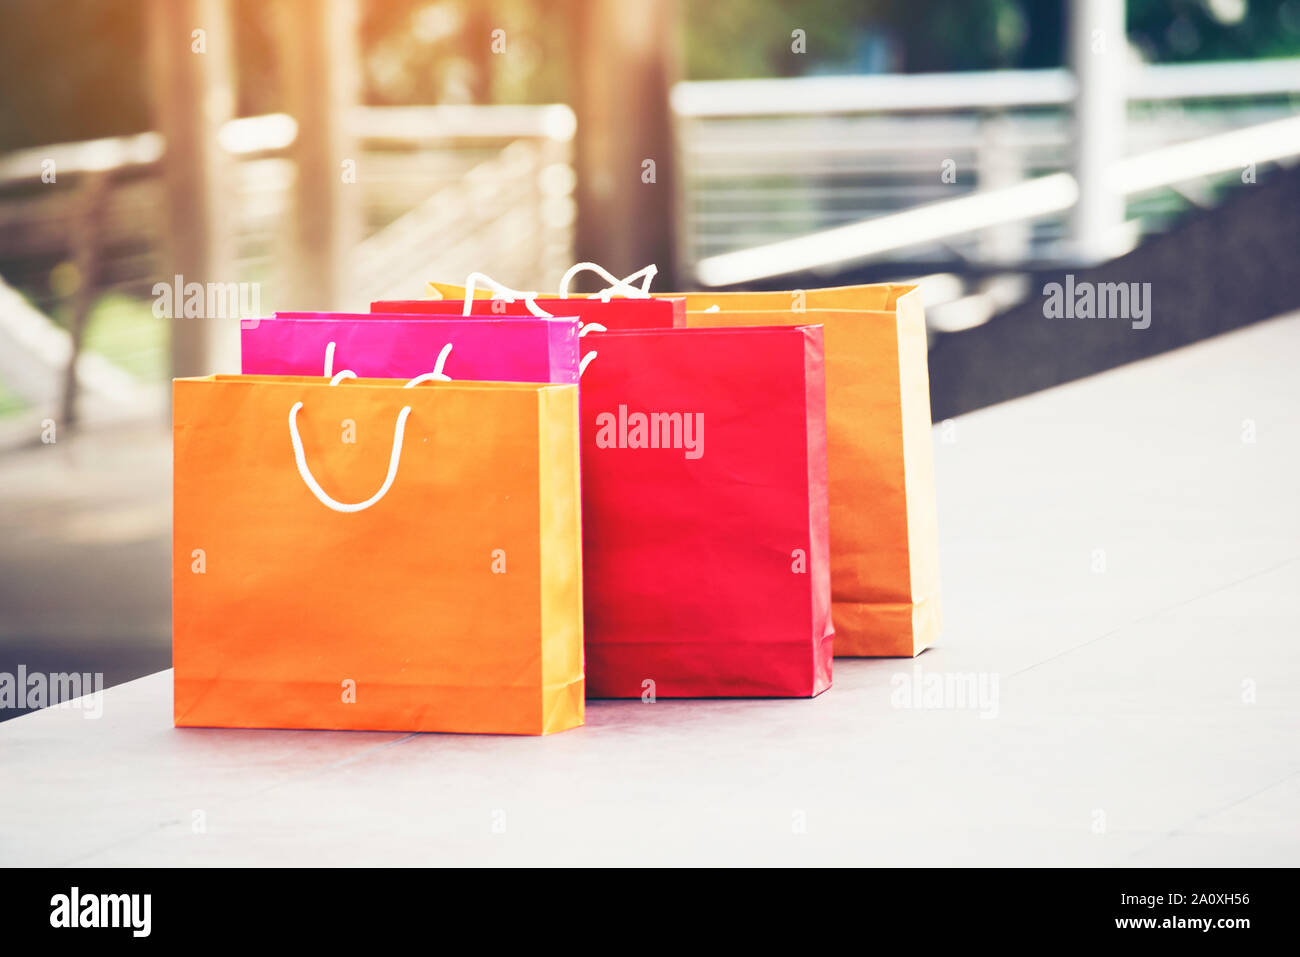 Shopping bags of women crazy shopaholic person at shopping mall. Woman love online shopping website with sales tags. E-commerce Bag Concept. Stock Photo